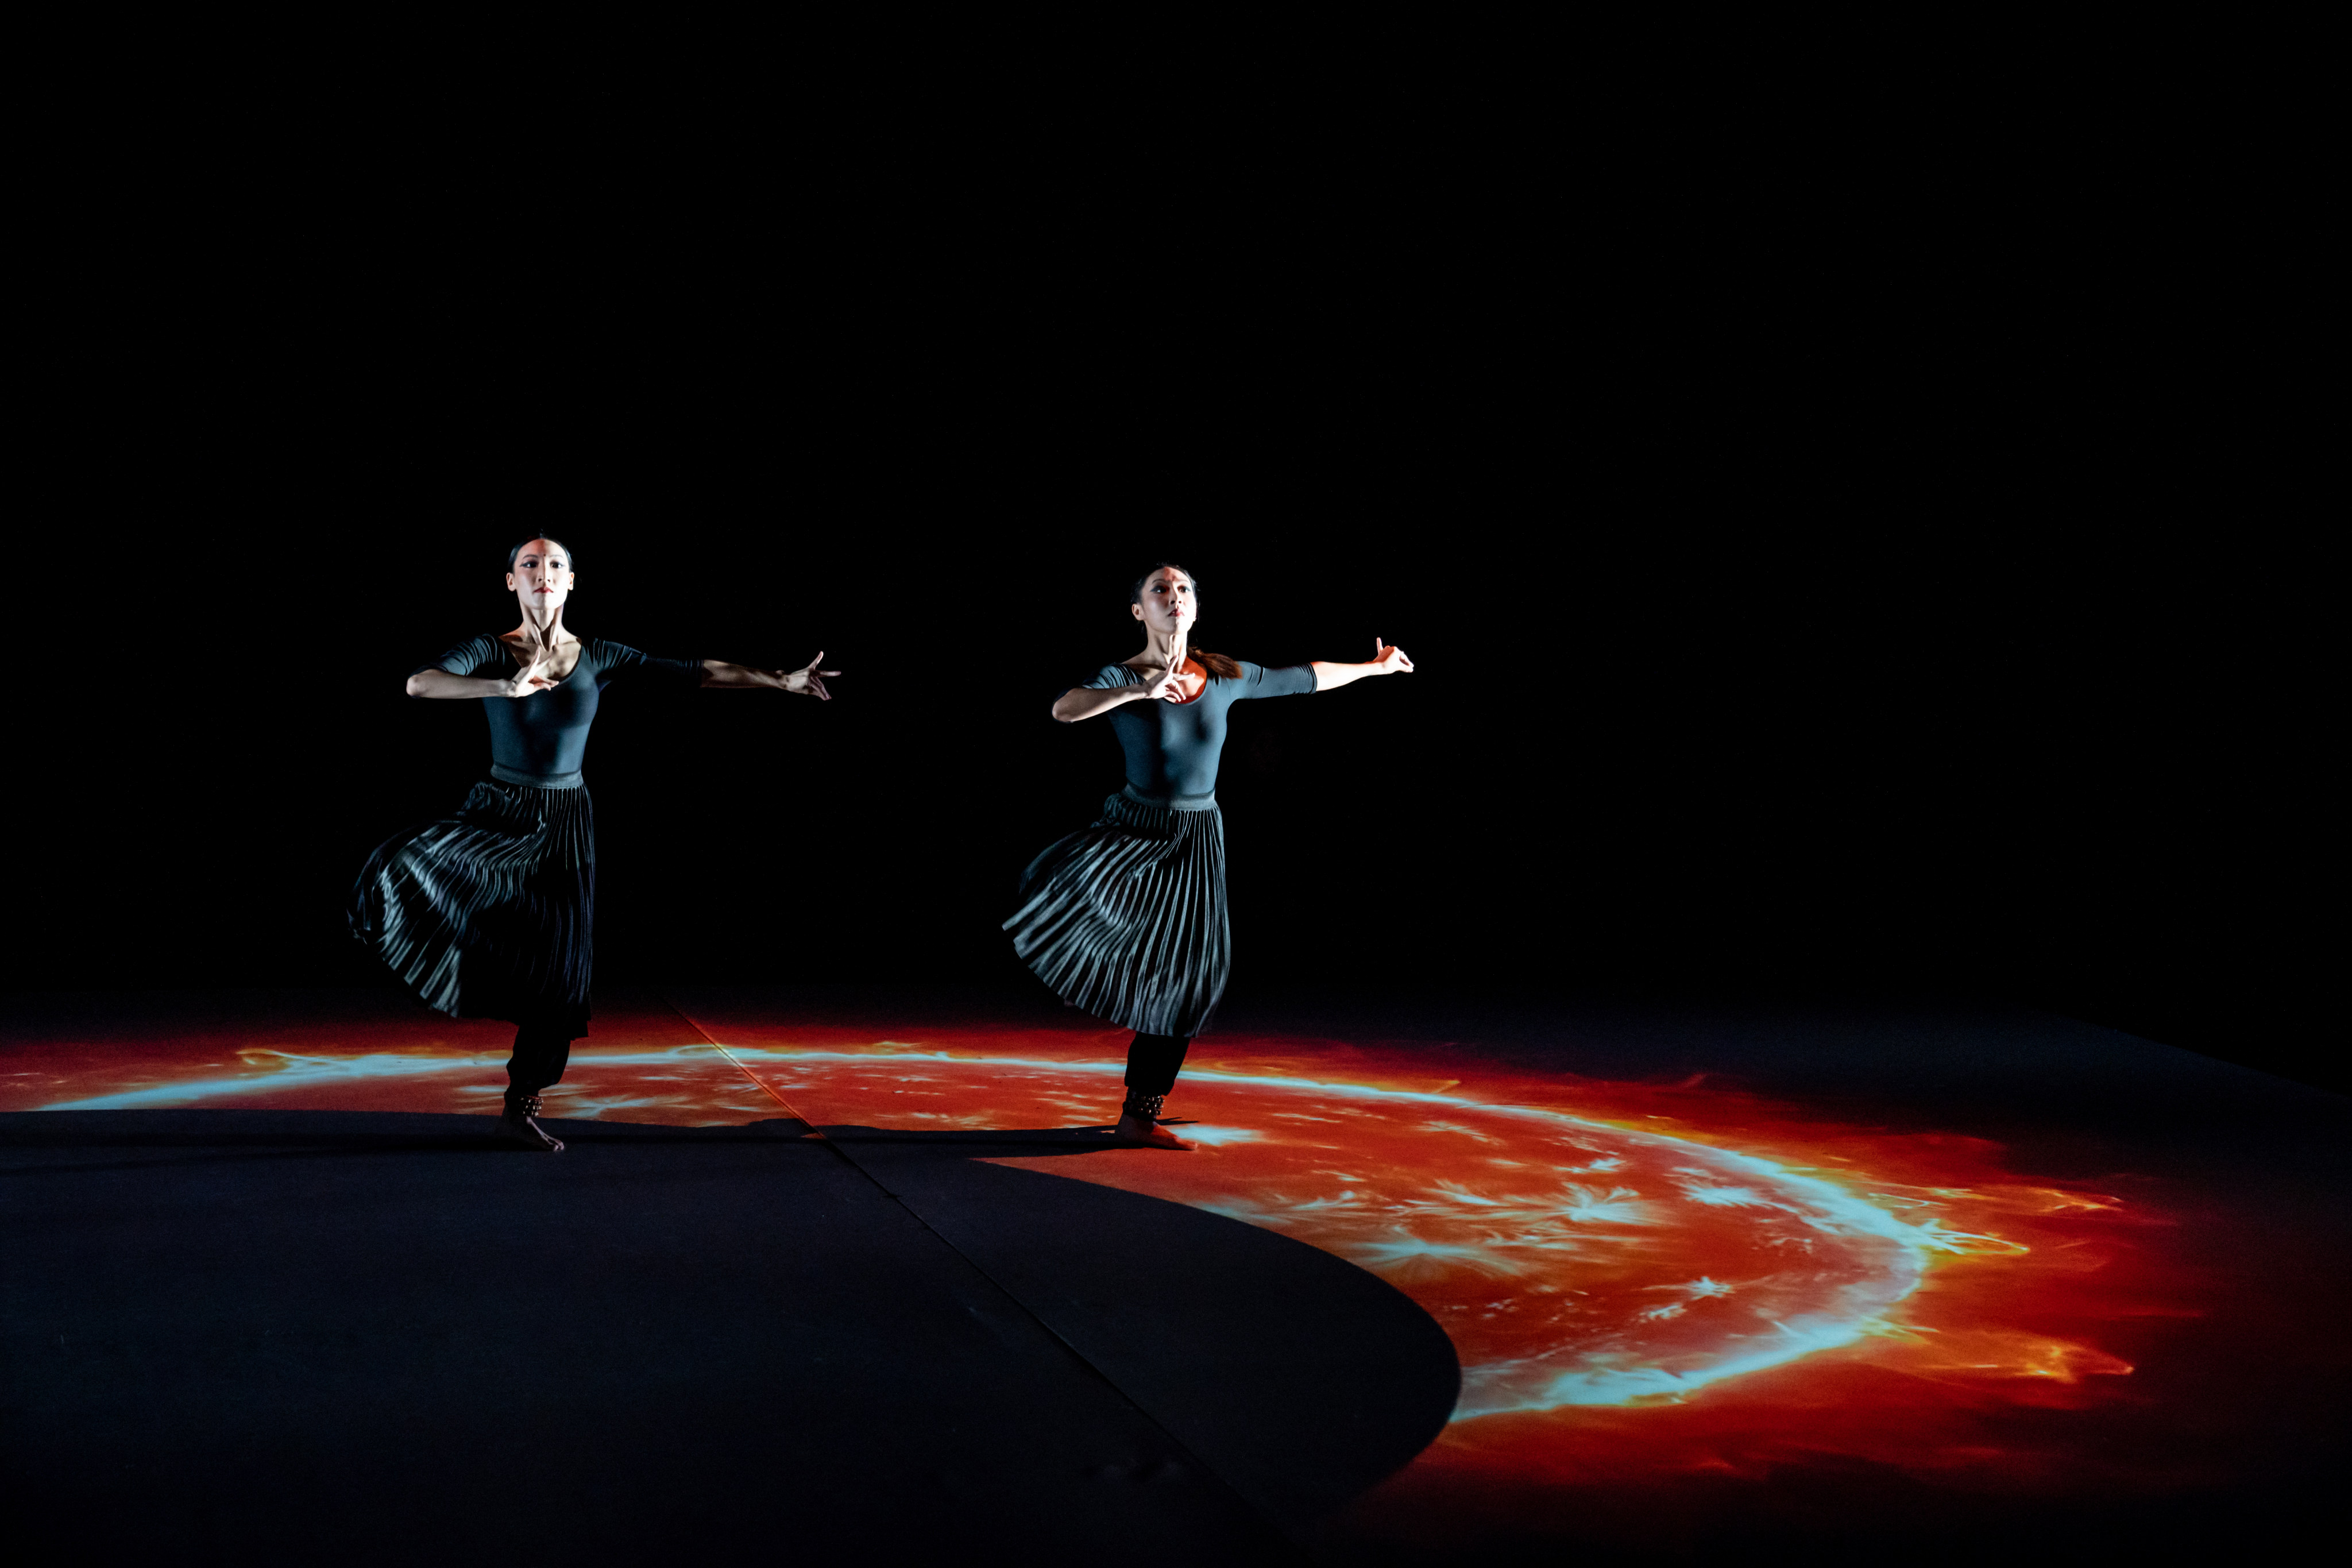 Jasmine Lam (left) and Peggy Chow perform “Bhagavad Gita”, Chinese theatre director Tang Shu-wing’s take on the epic Sanskrit poem. Photo:  Tang Shu-wing Theatre Studio